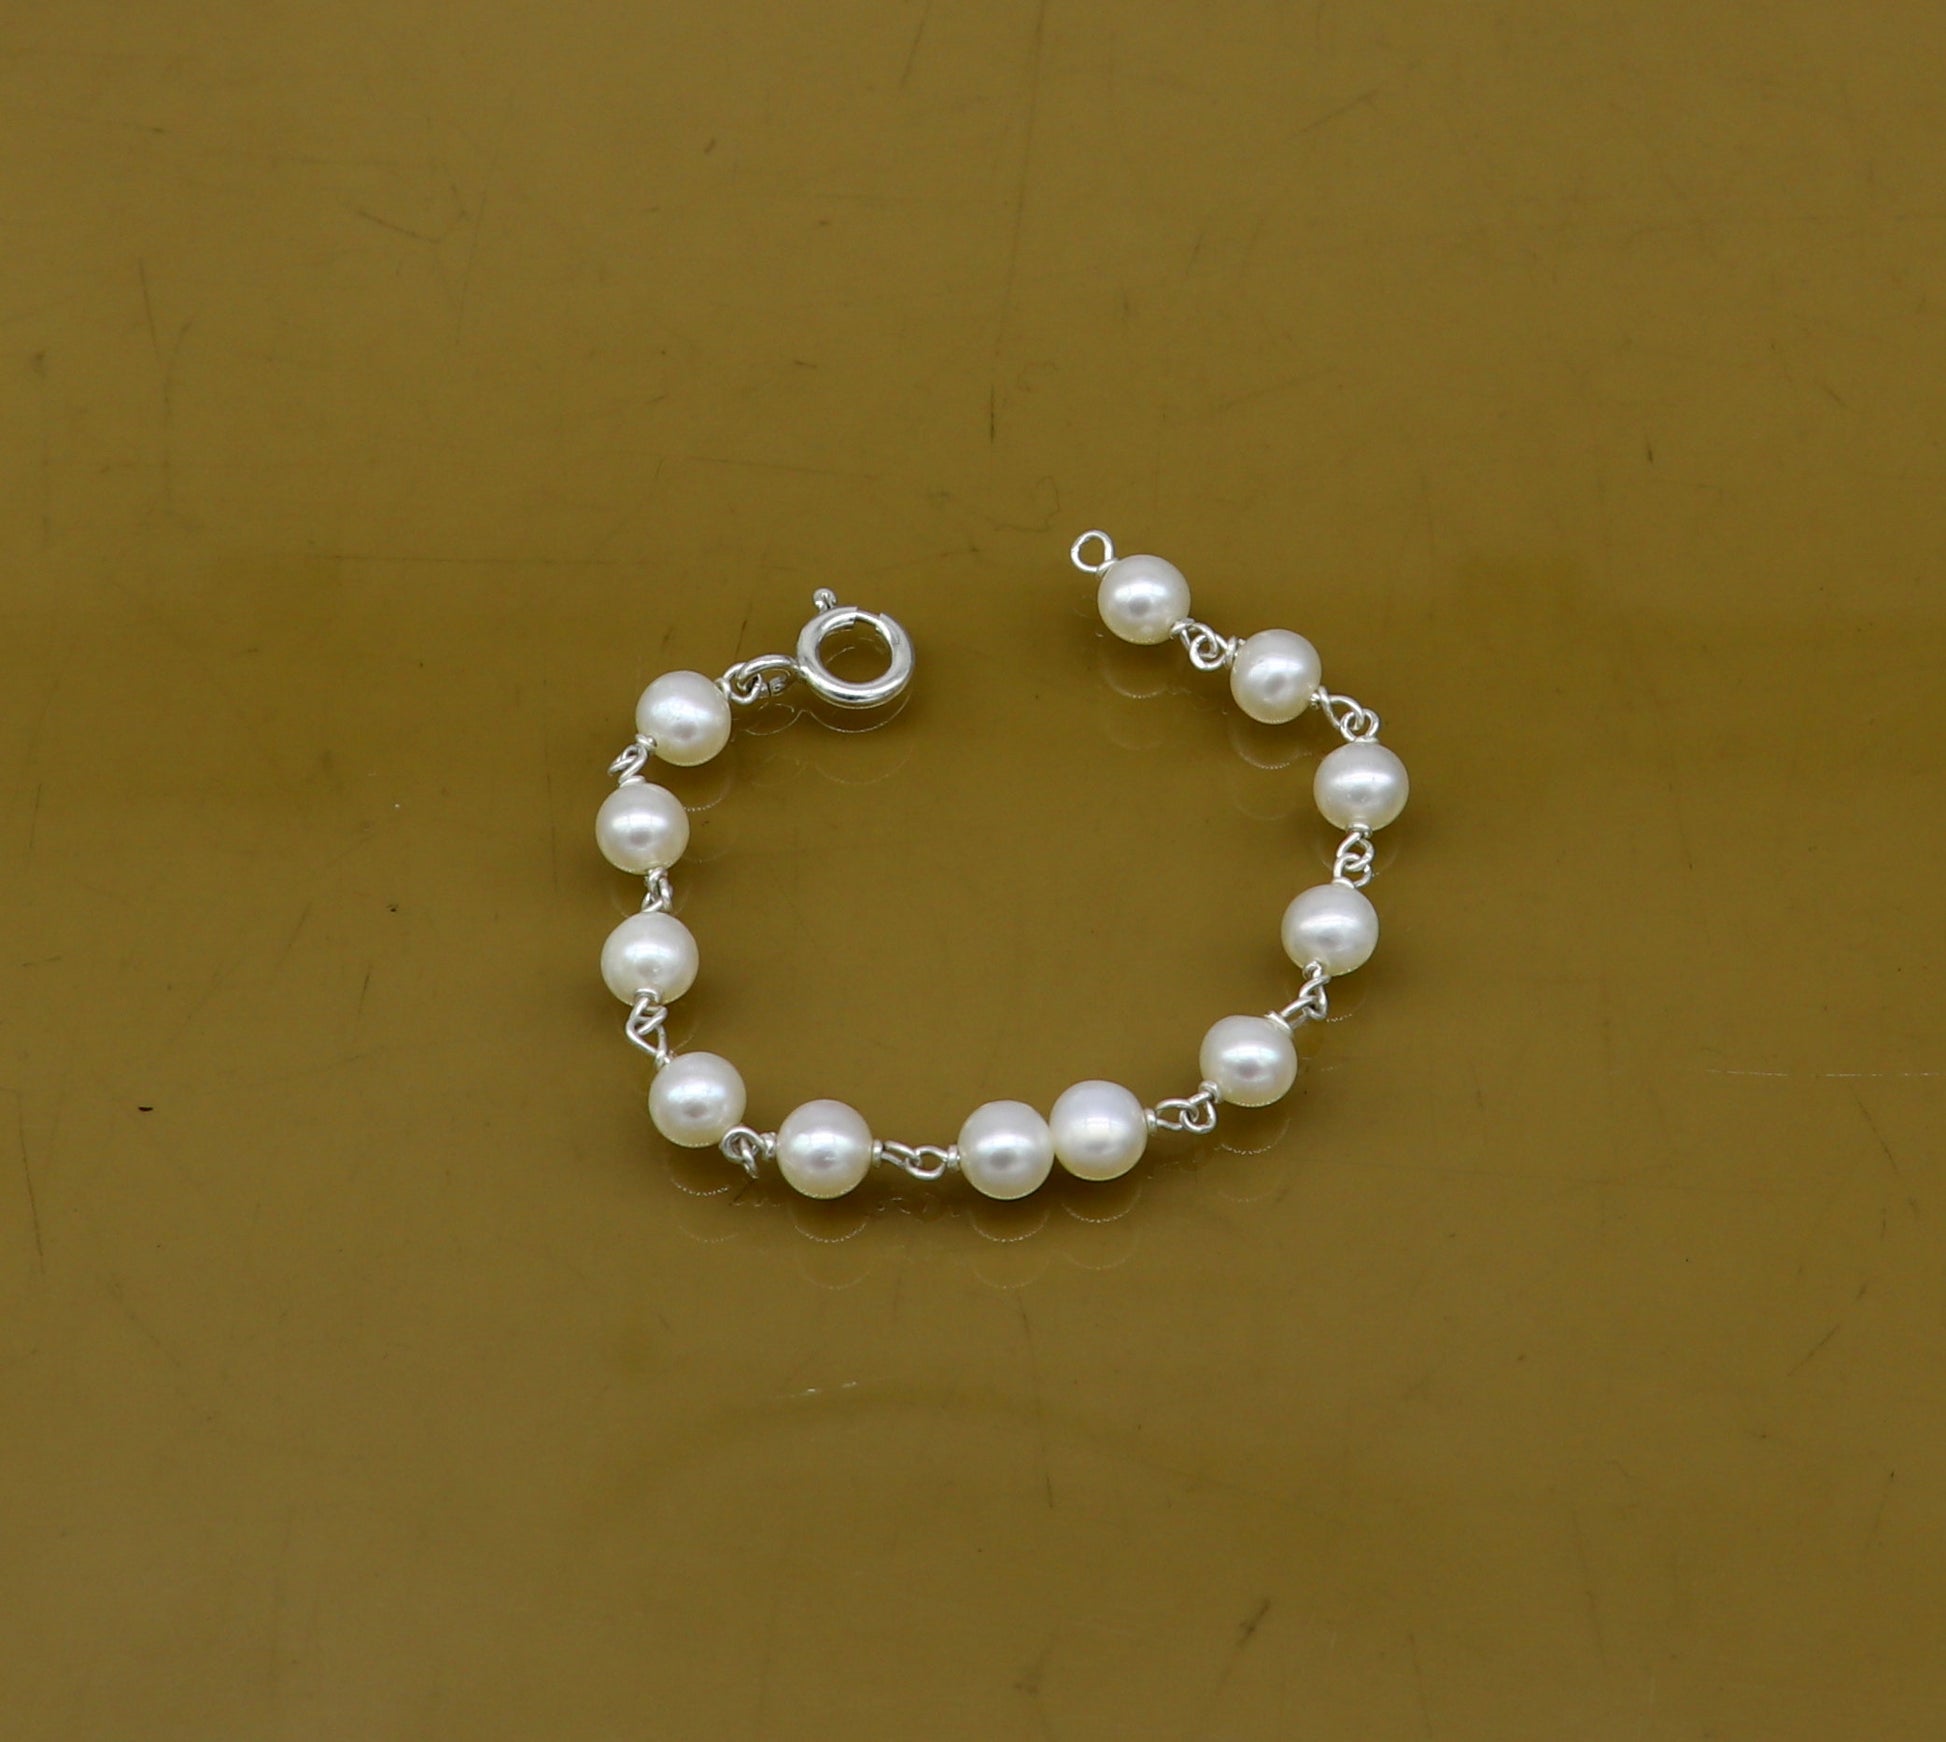 Natural pearl 5mm beaded 925 sterling silver handmade customized baby bracelet, top class gifting kids jewelry, new born baby jewelry bbr3 - TRIBAL ORNAMENTS